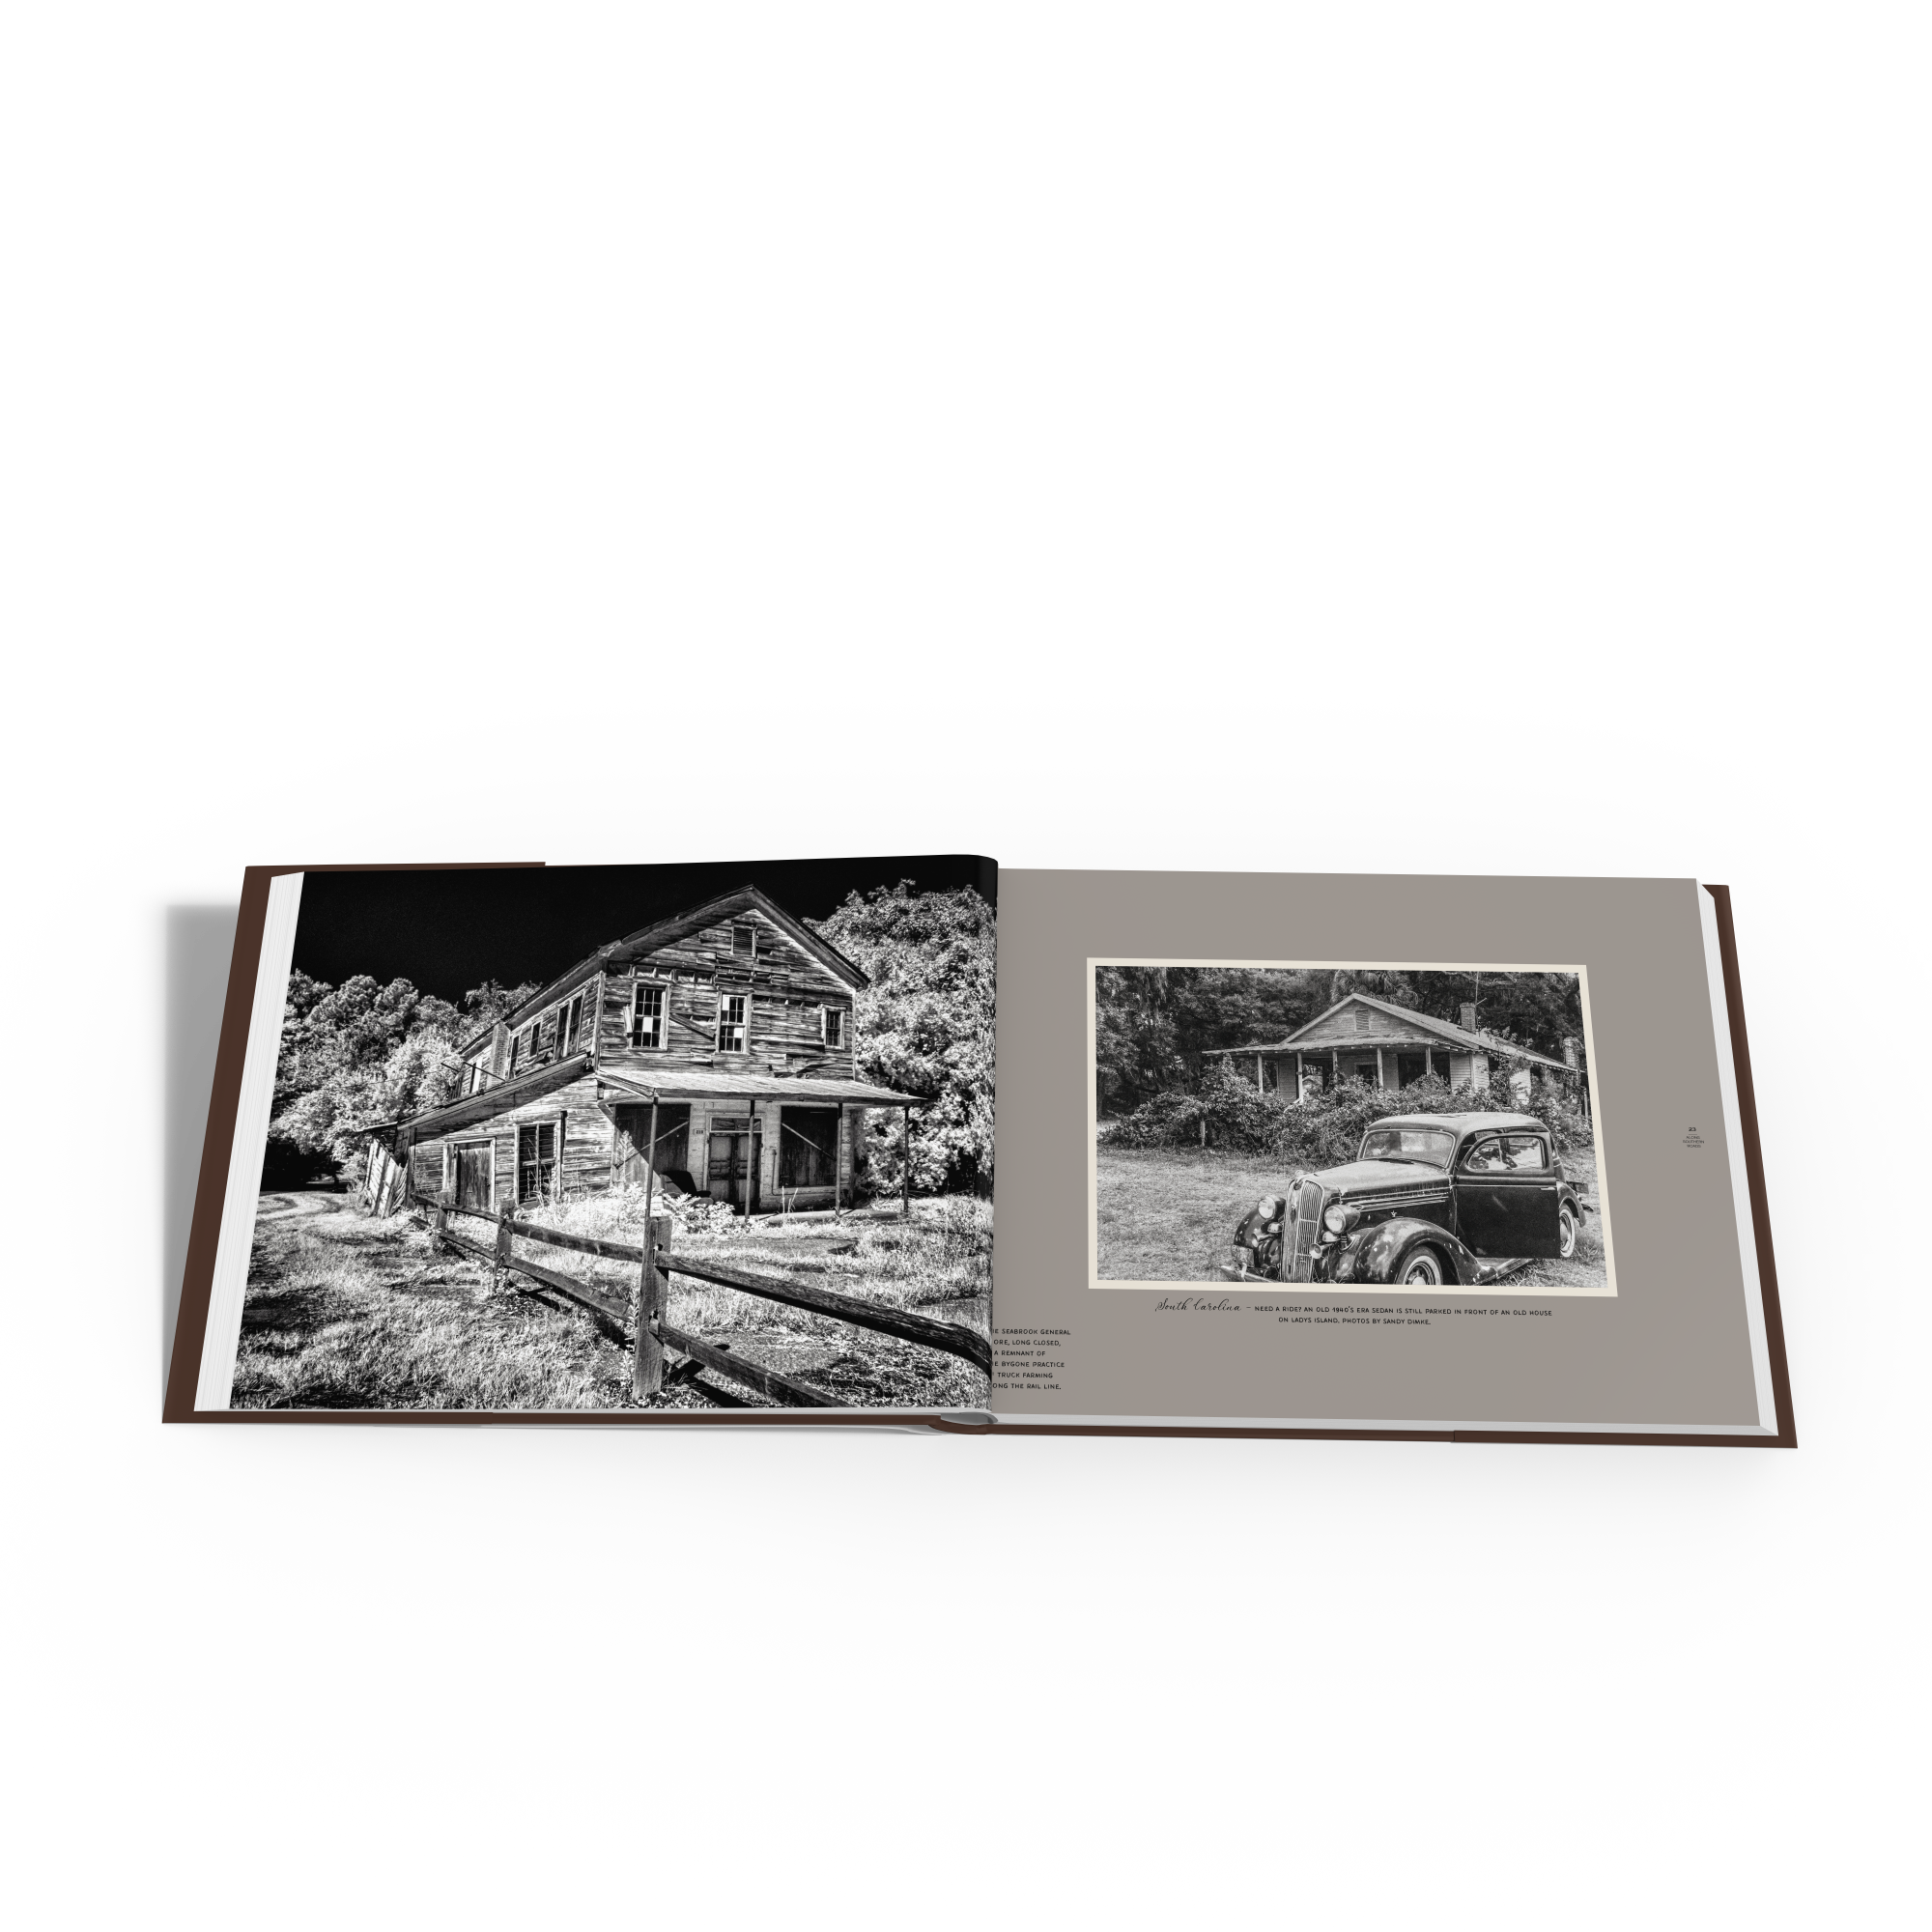 Along-Southern-Roads-Starbooks-Lydia-Inglett-Photography-Gift-Book-spread-black-and-white-house